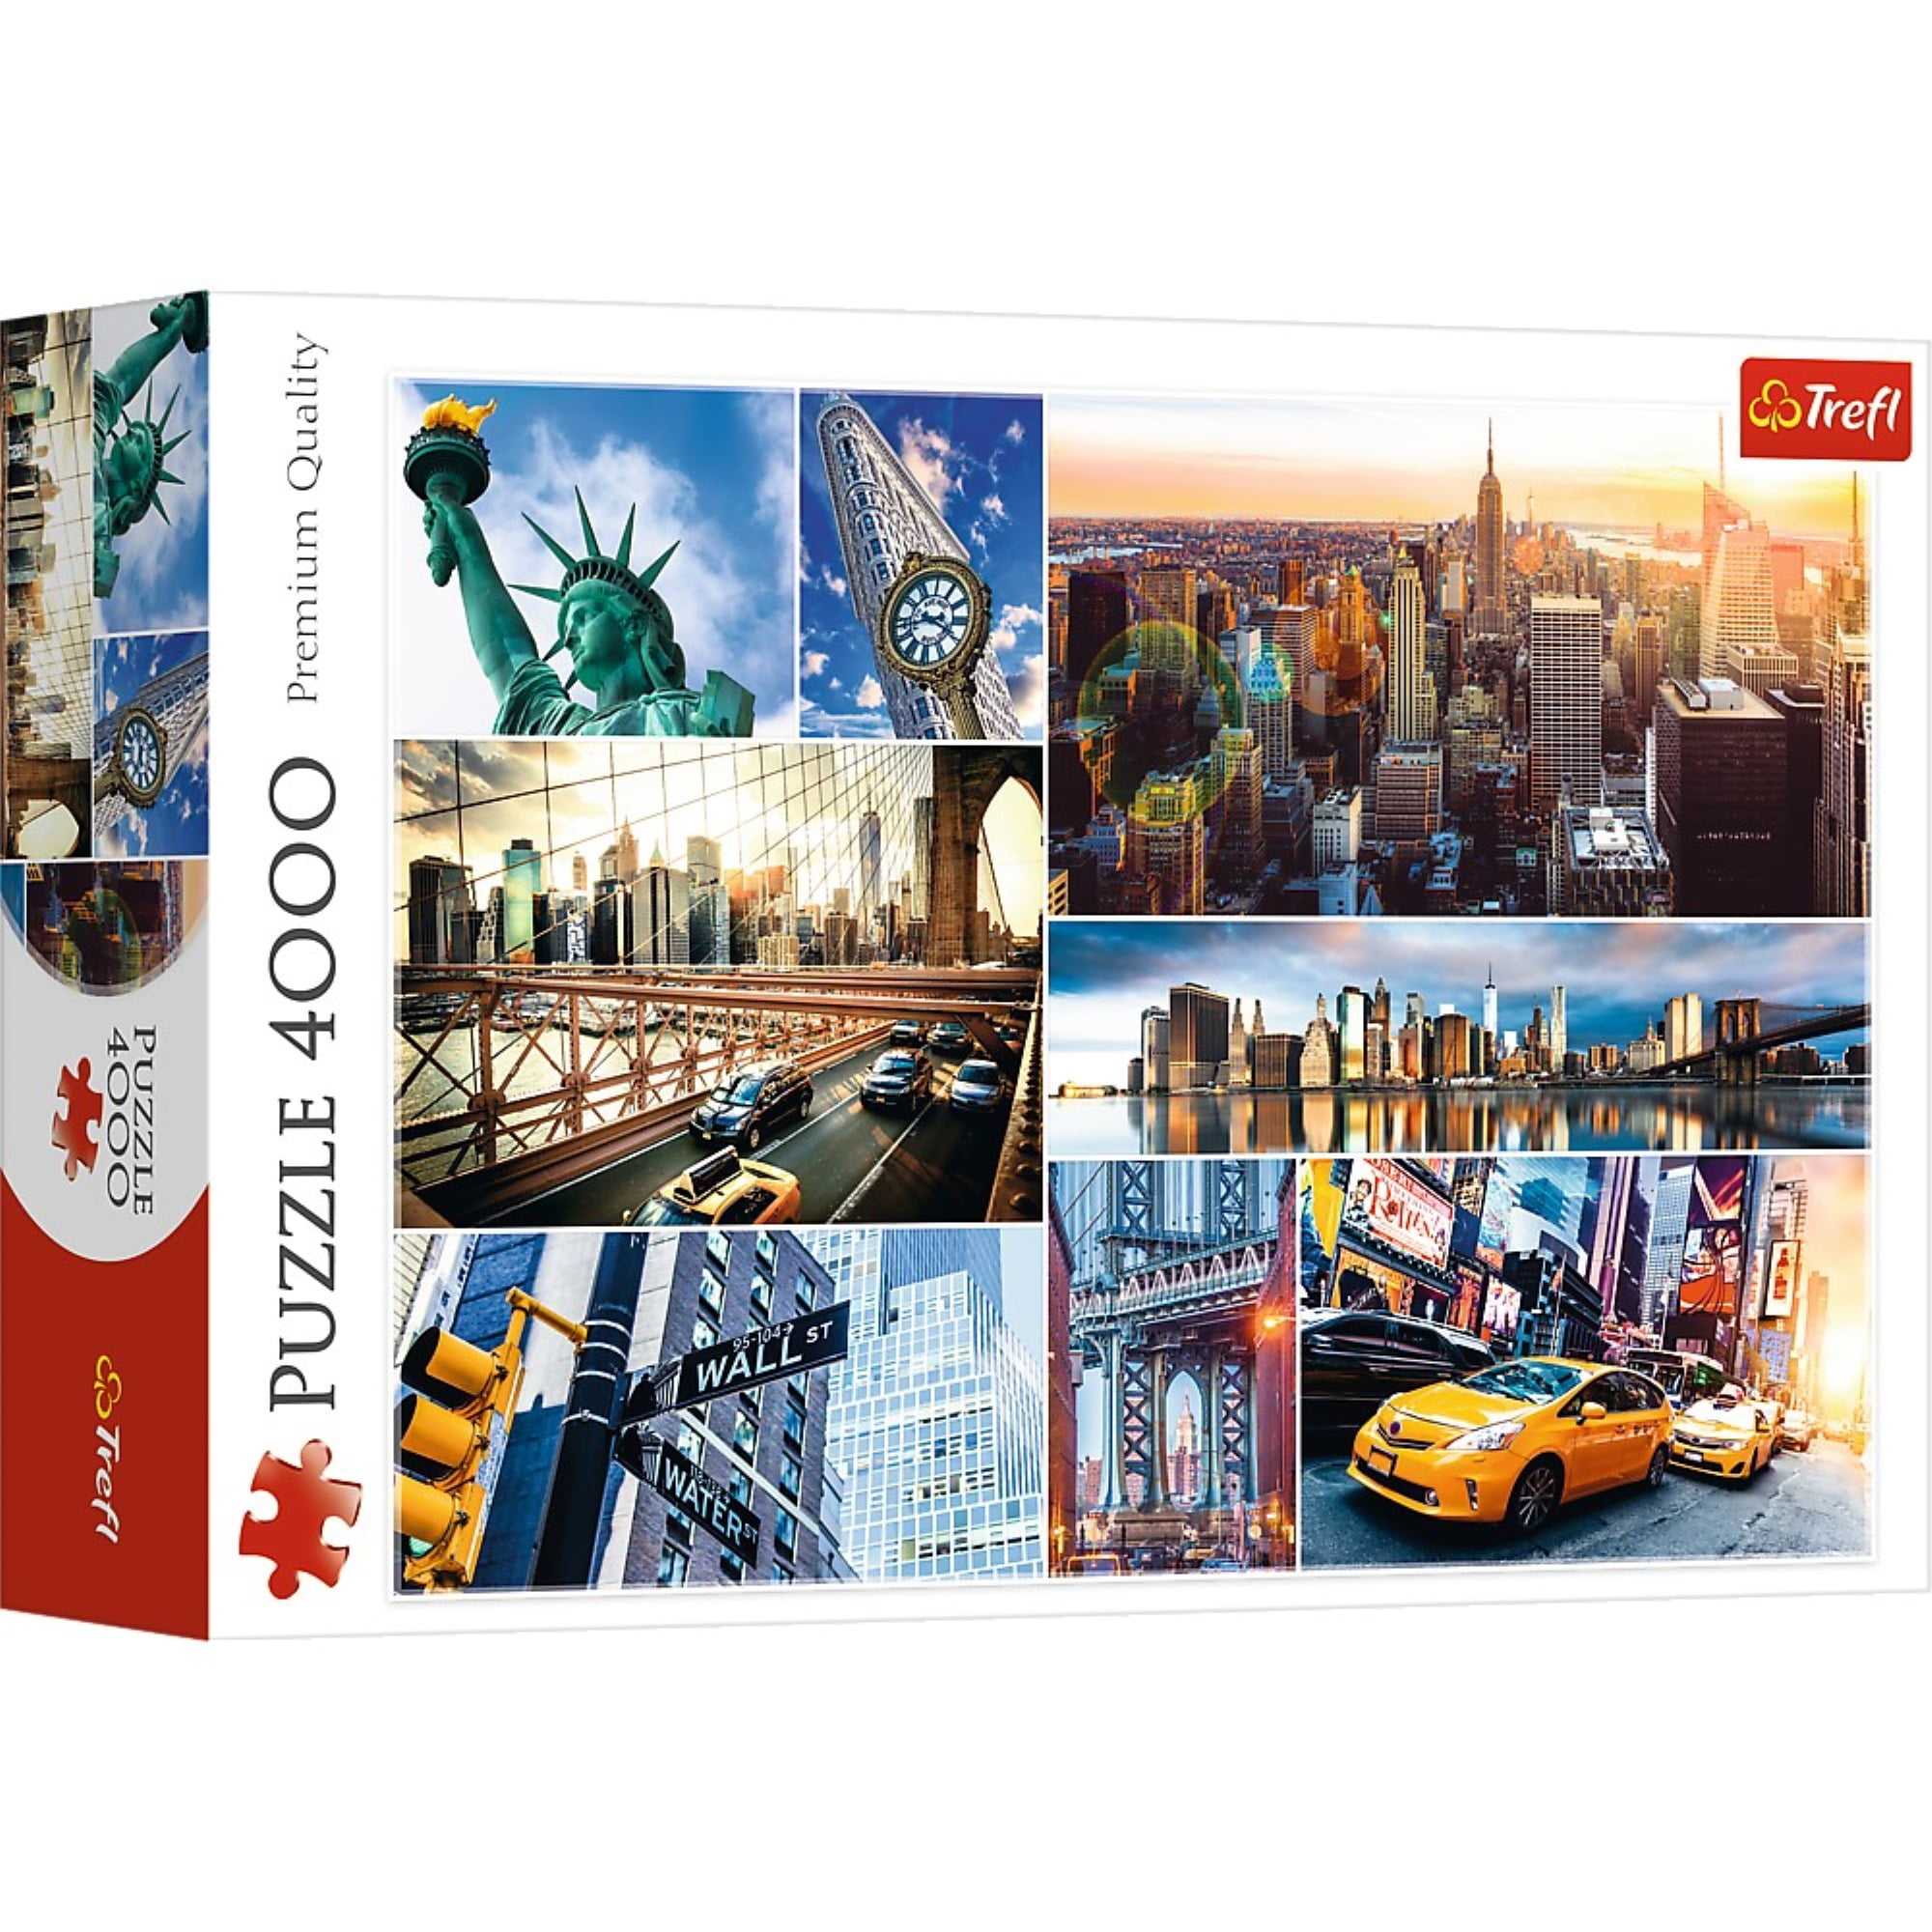 Trefl 4000 Piece Jigsaw Puzzle, New York Collage, City Skyline and Empire  State Building Puzzle, USA, Adult Puzzles, 45006 